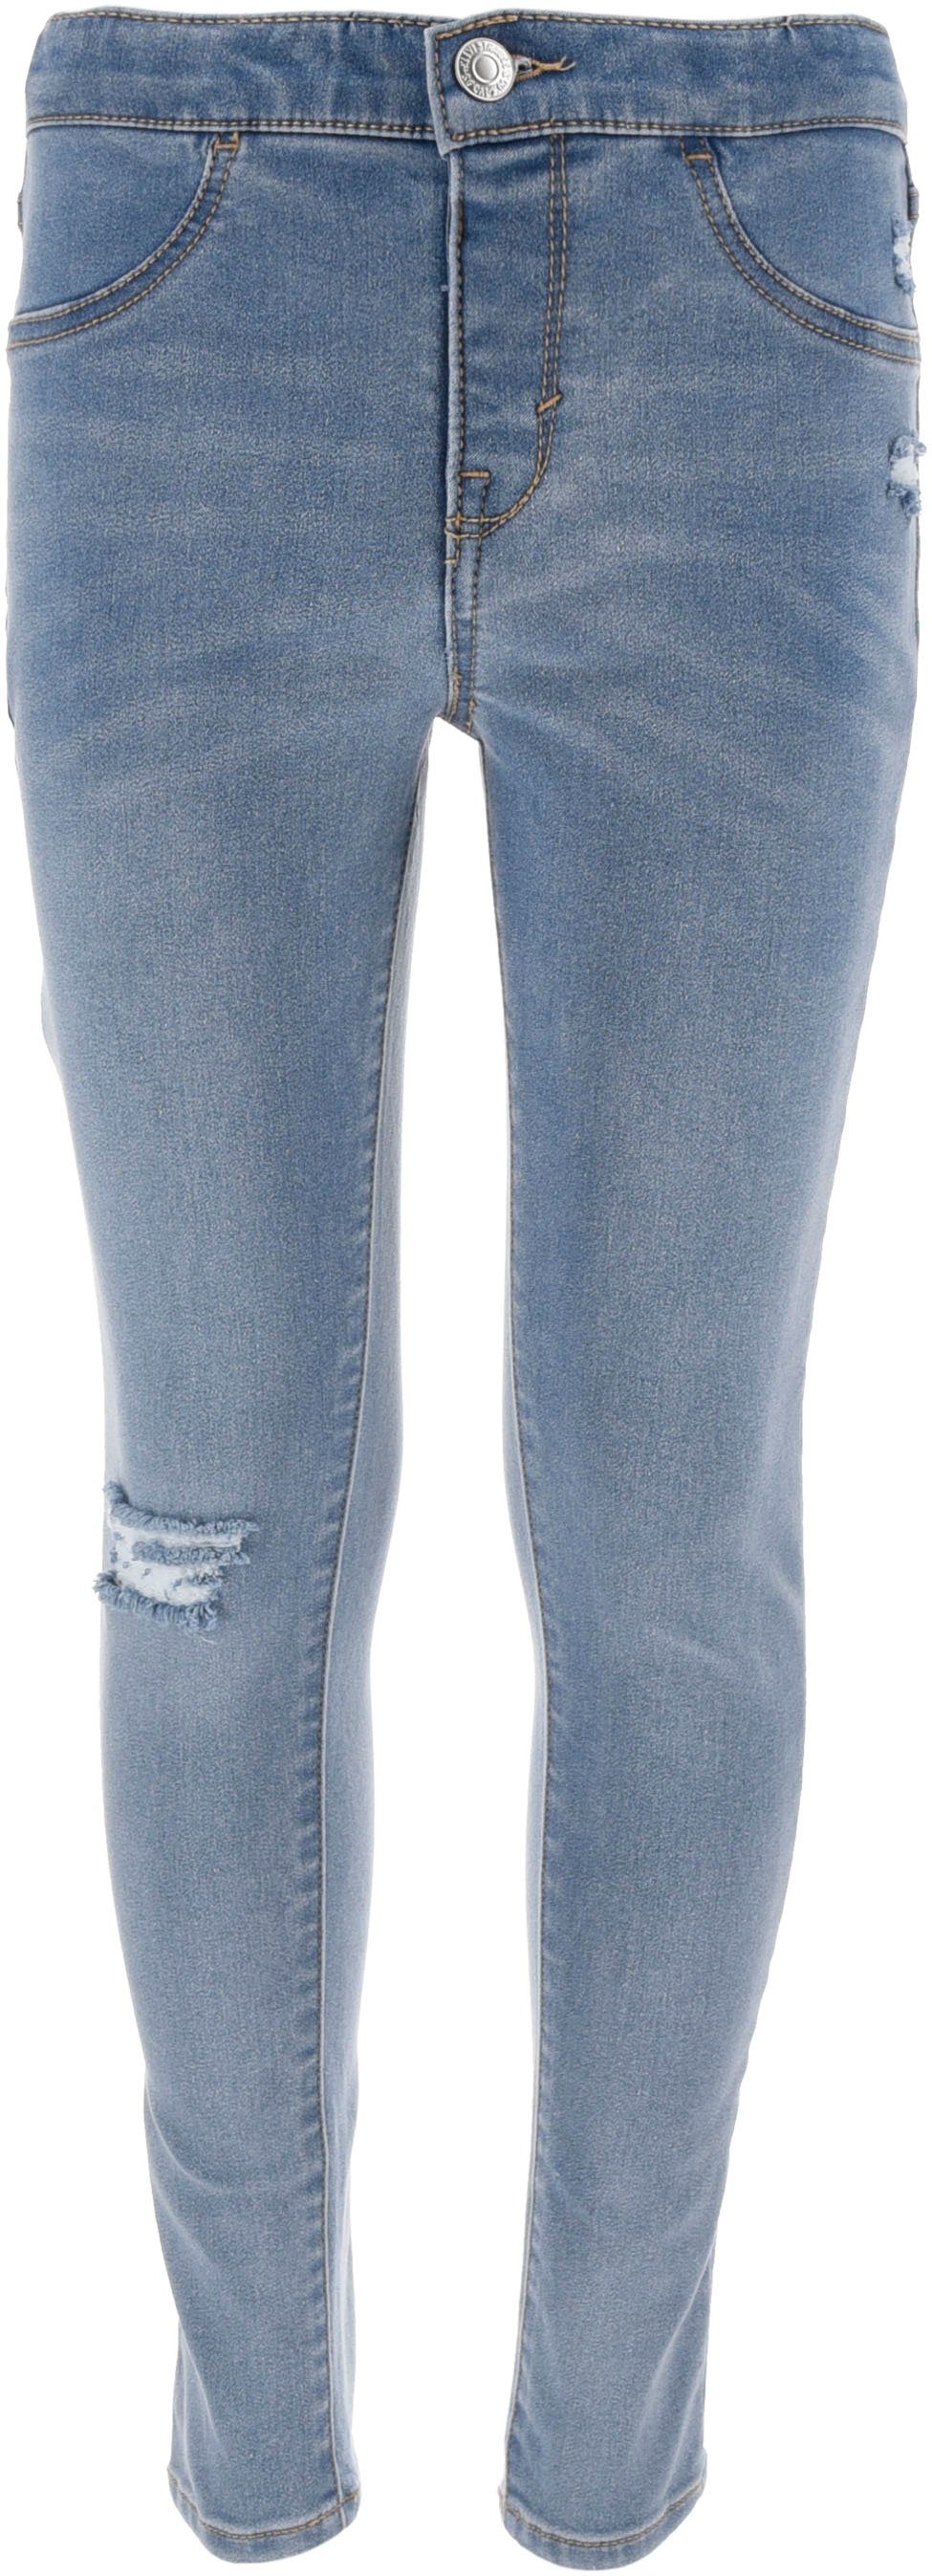 Jeansjeggings GIRLS vices for miami LEGGINGS PULL-ON Levi's® Kids